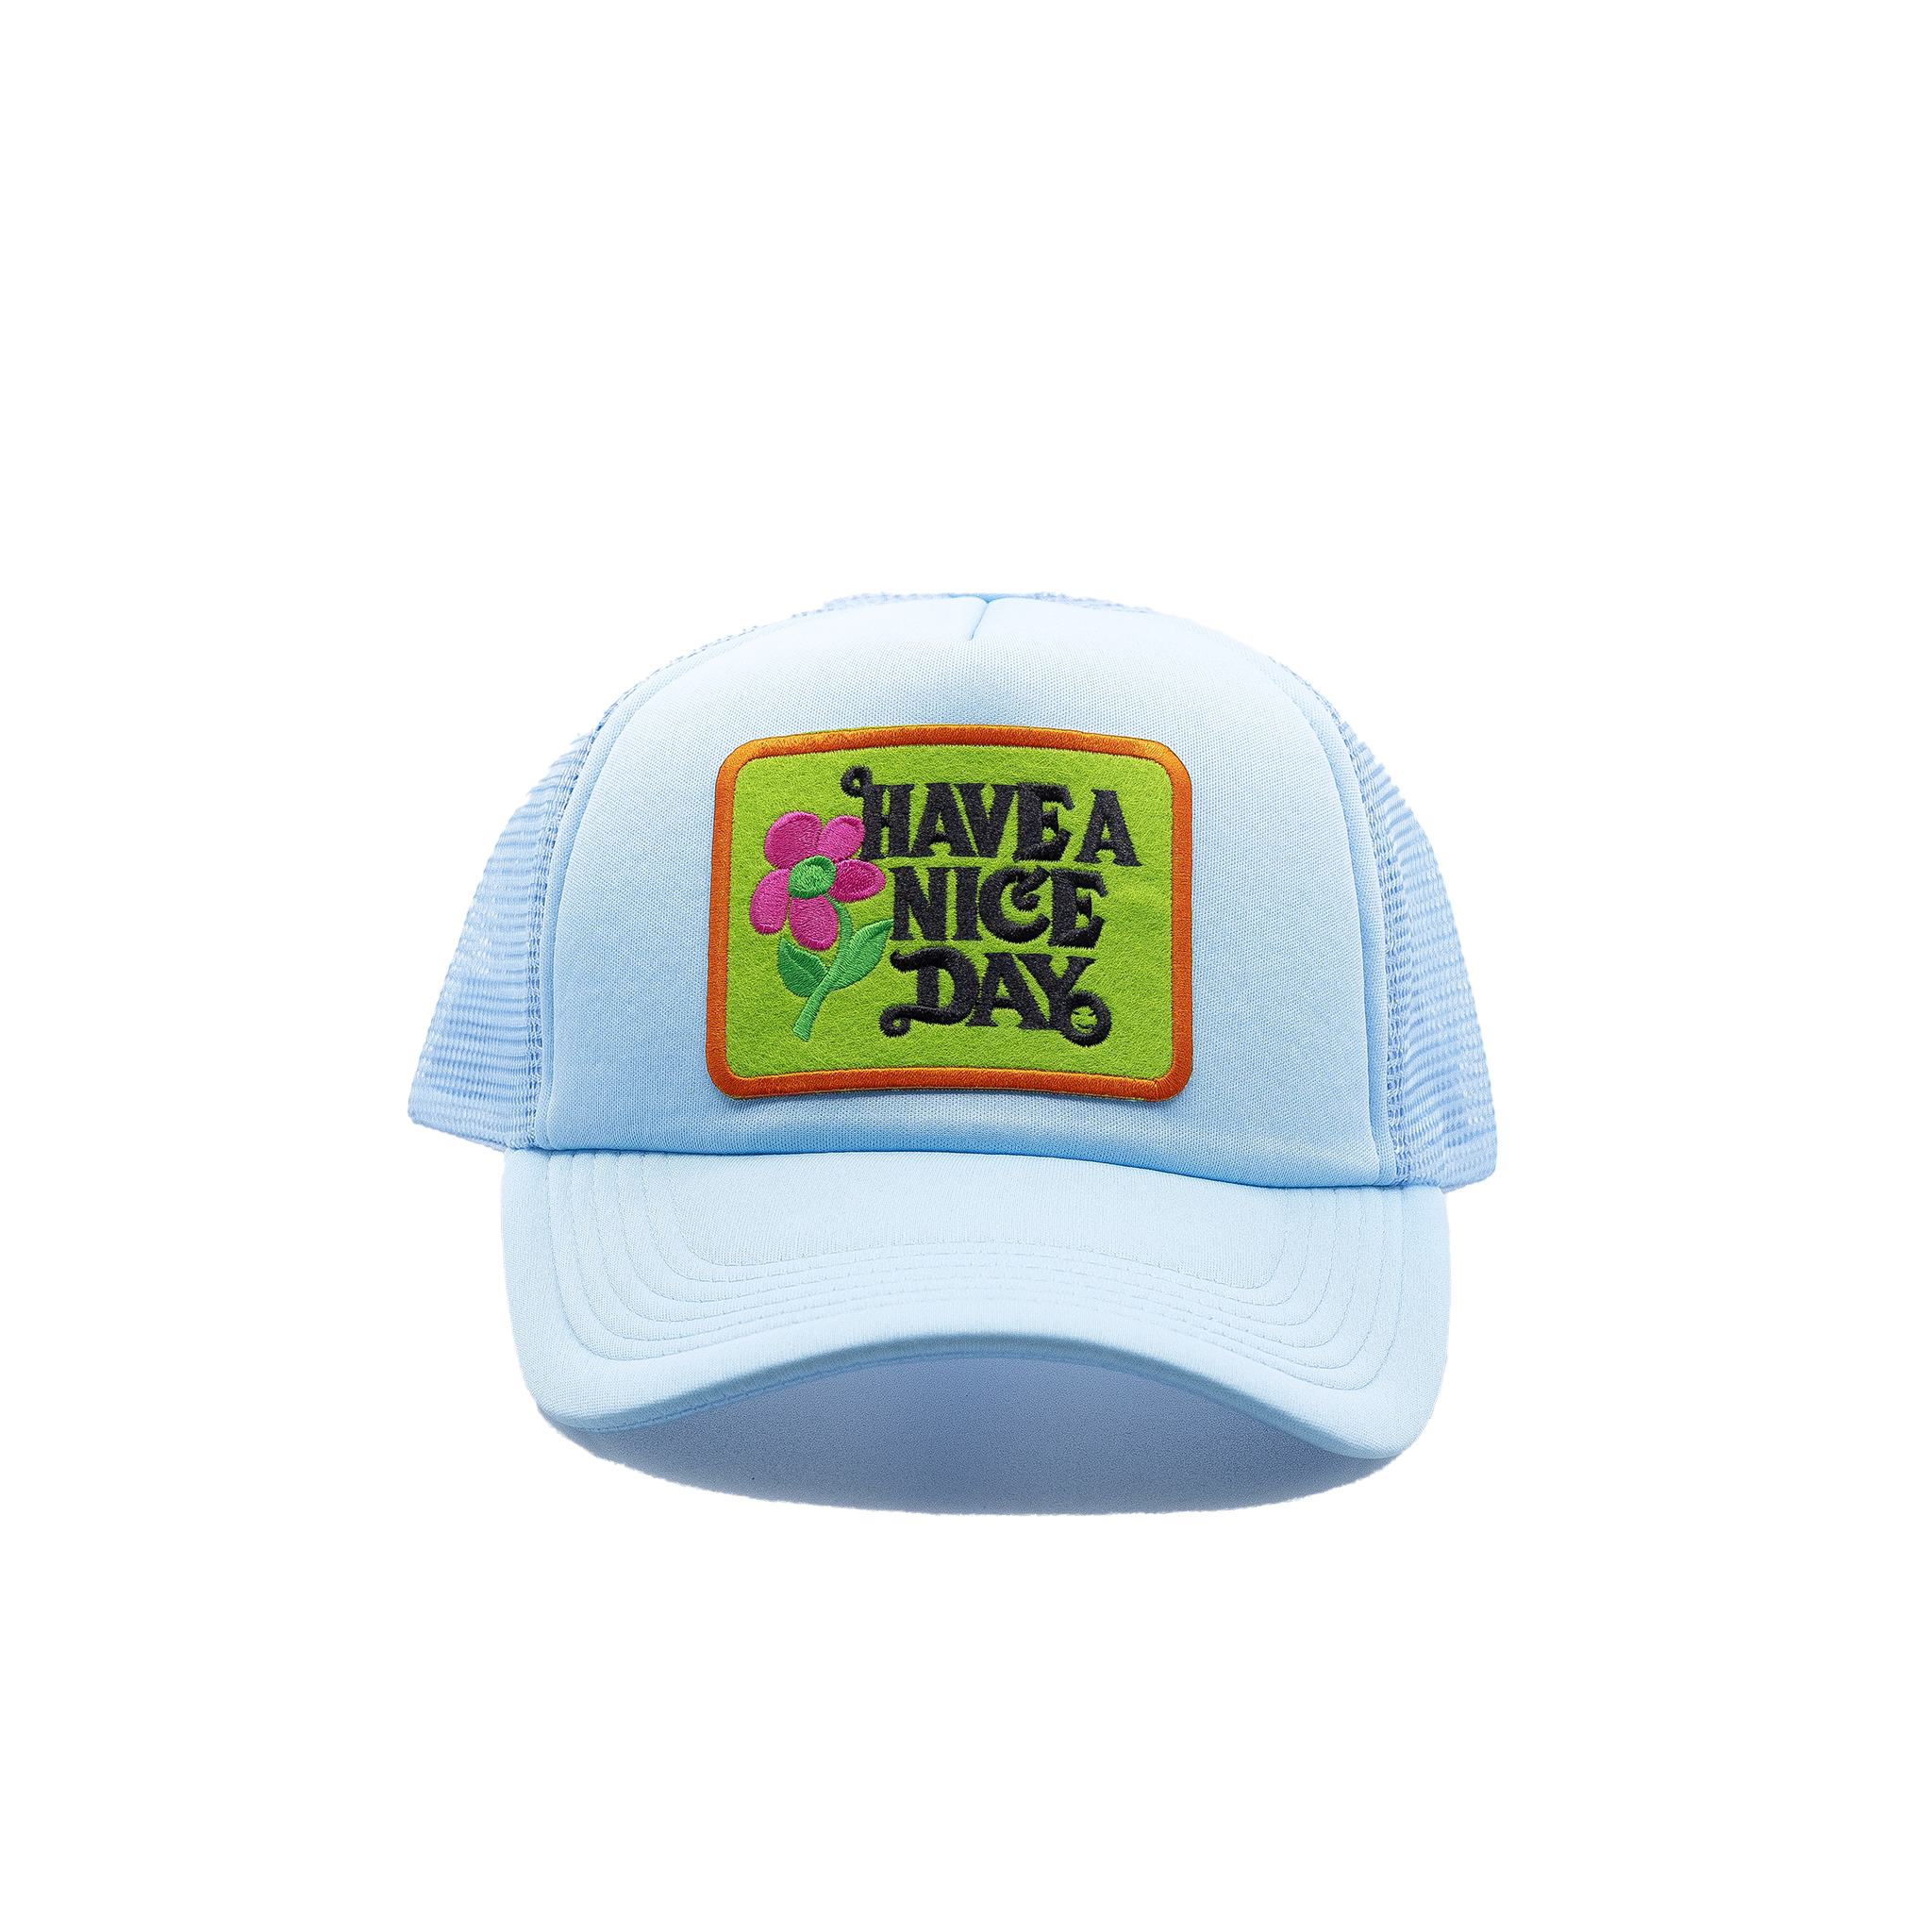 Have a Nice Day Sky Blue All Styles Trucker Hat